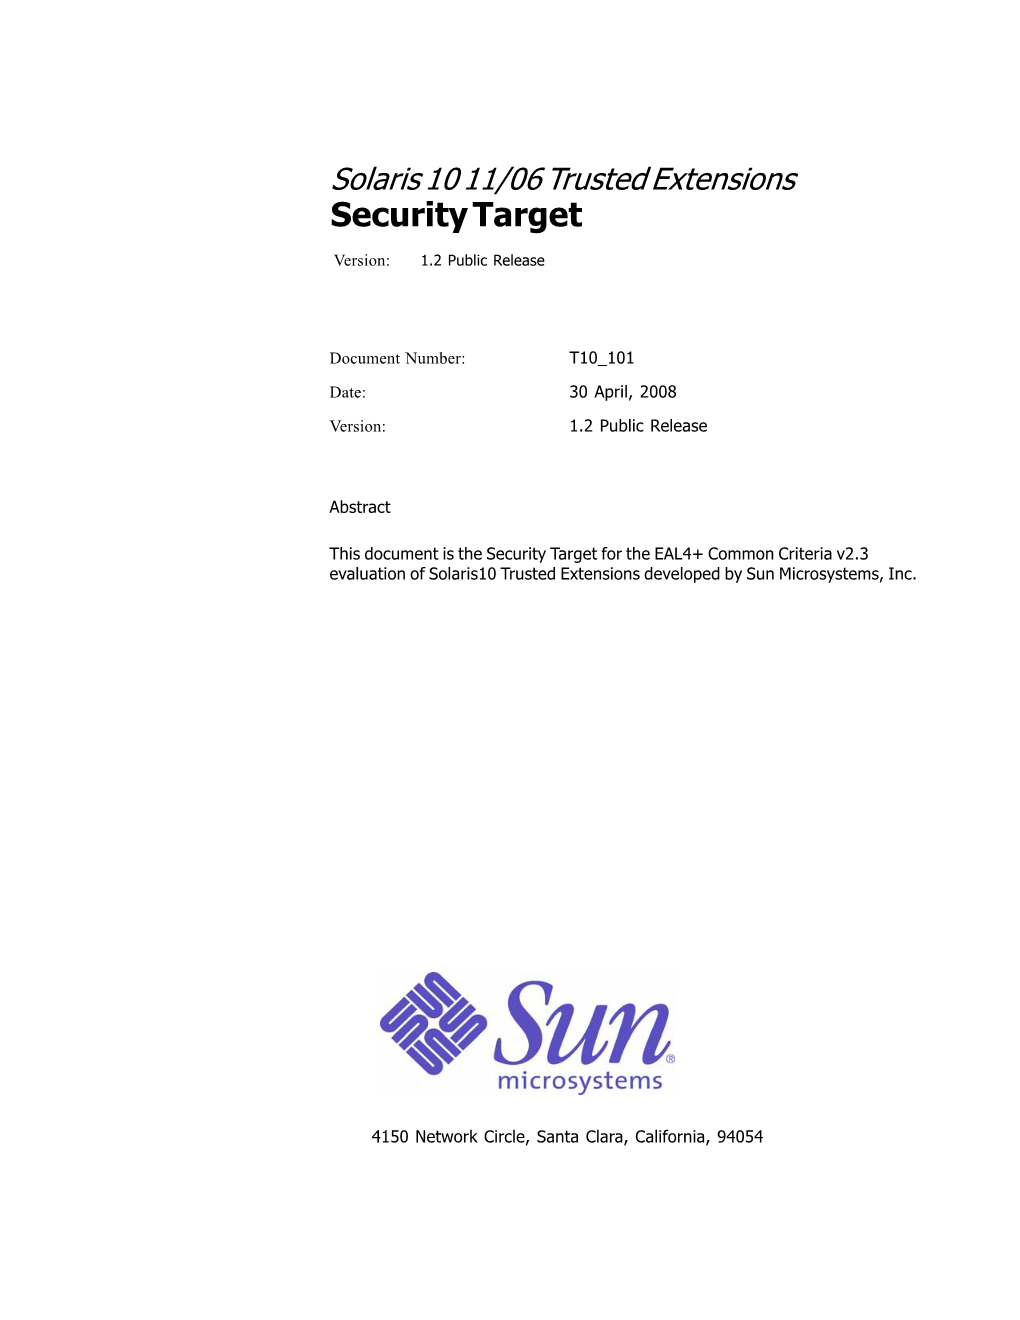 Solaris 10 11/06 Trusted Extensions Security Target